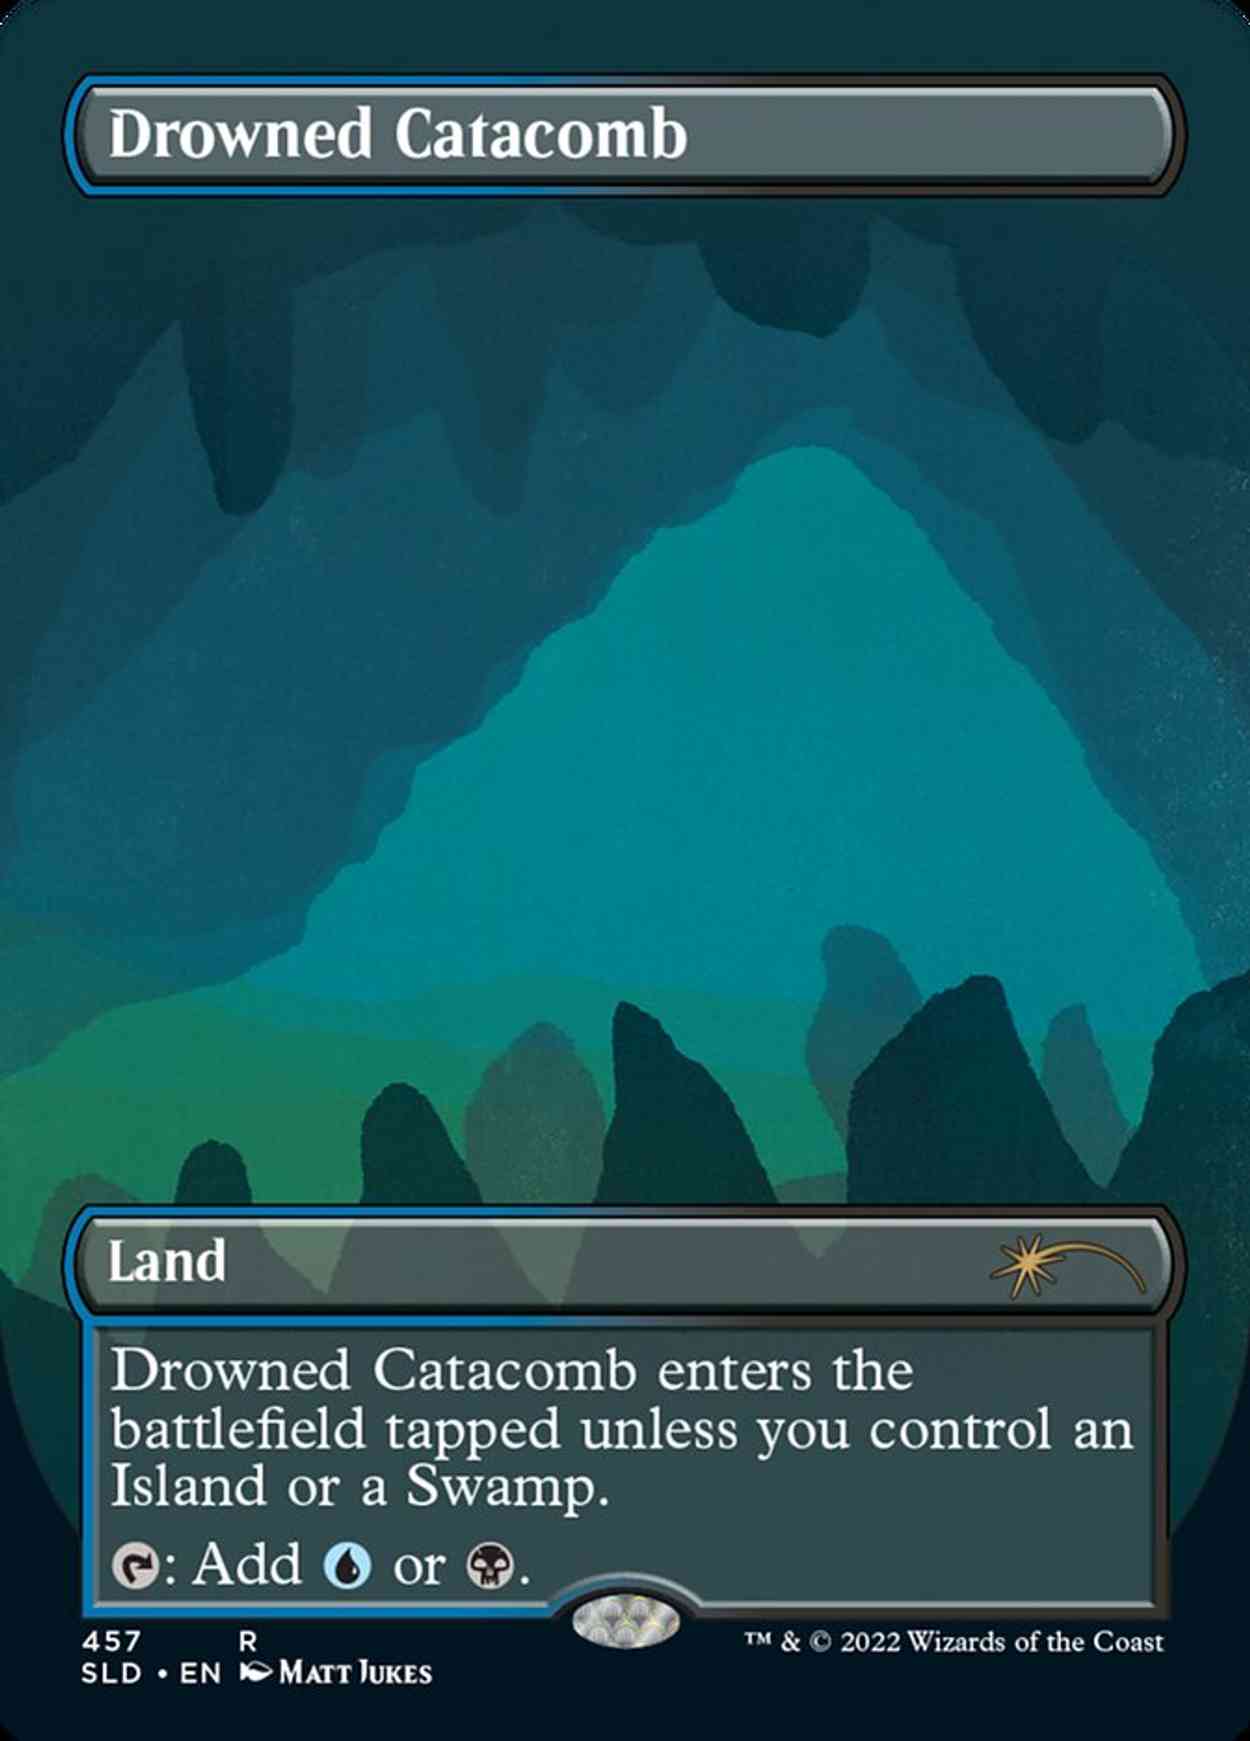 Drowned Catacomb magic card front